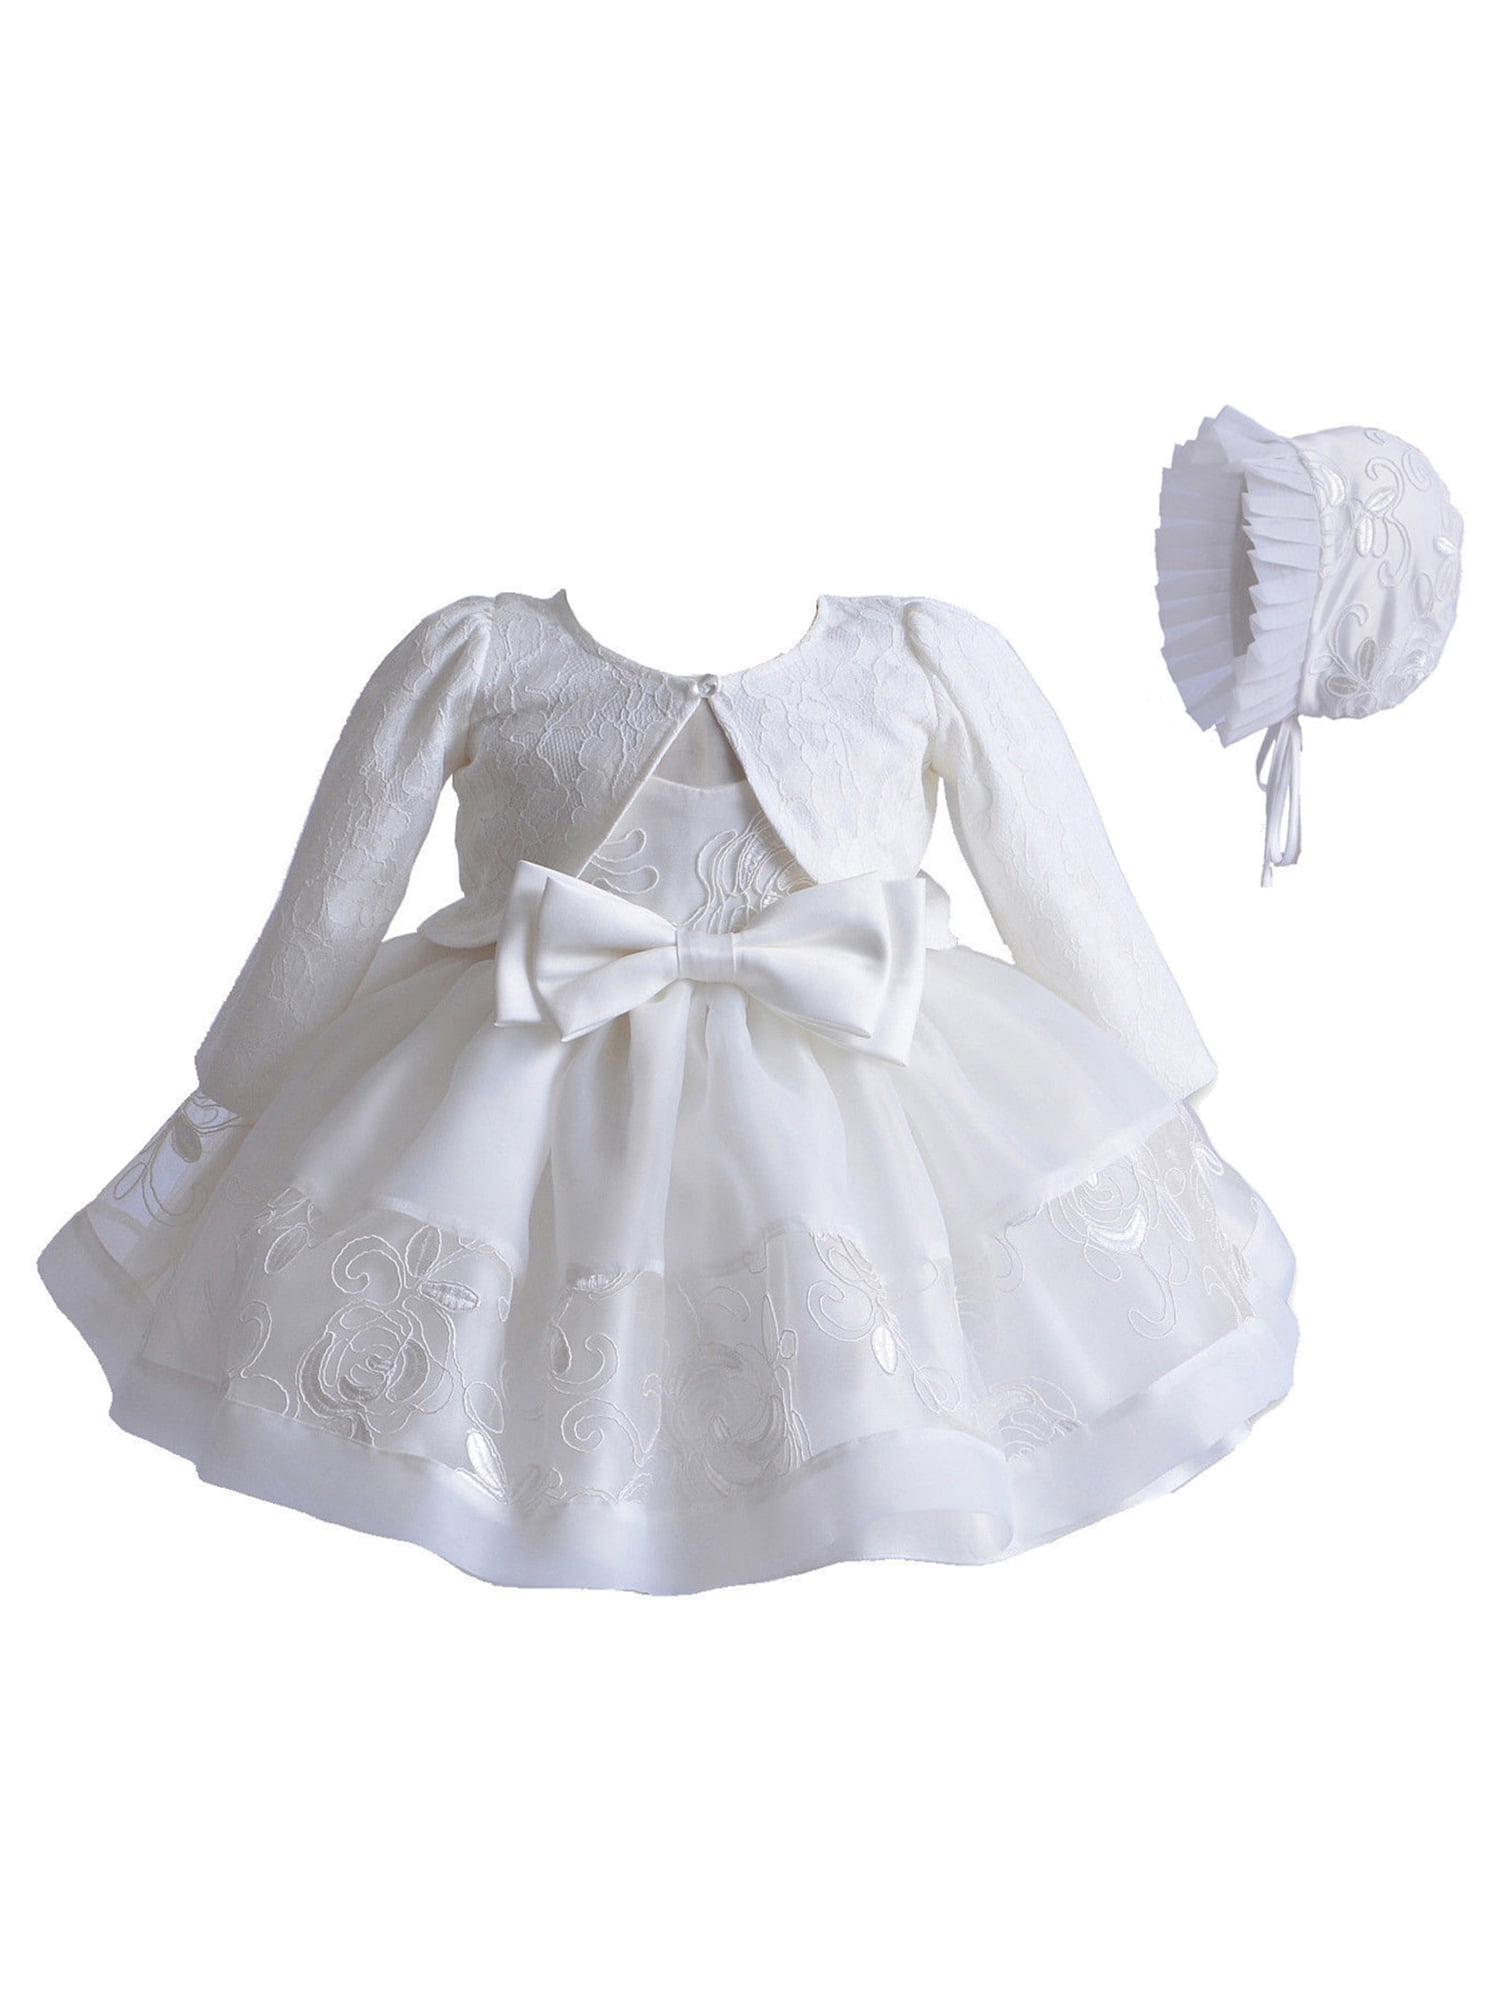 DREAM 0-3 months white lined autumn frilly baby dress